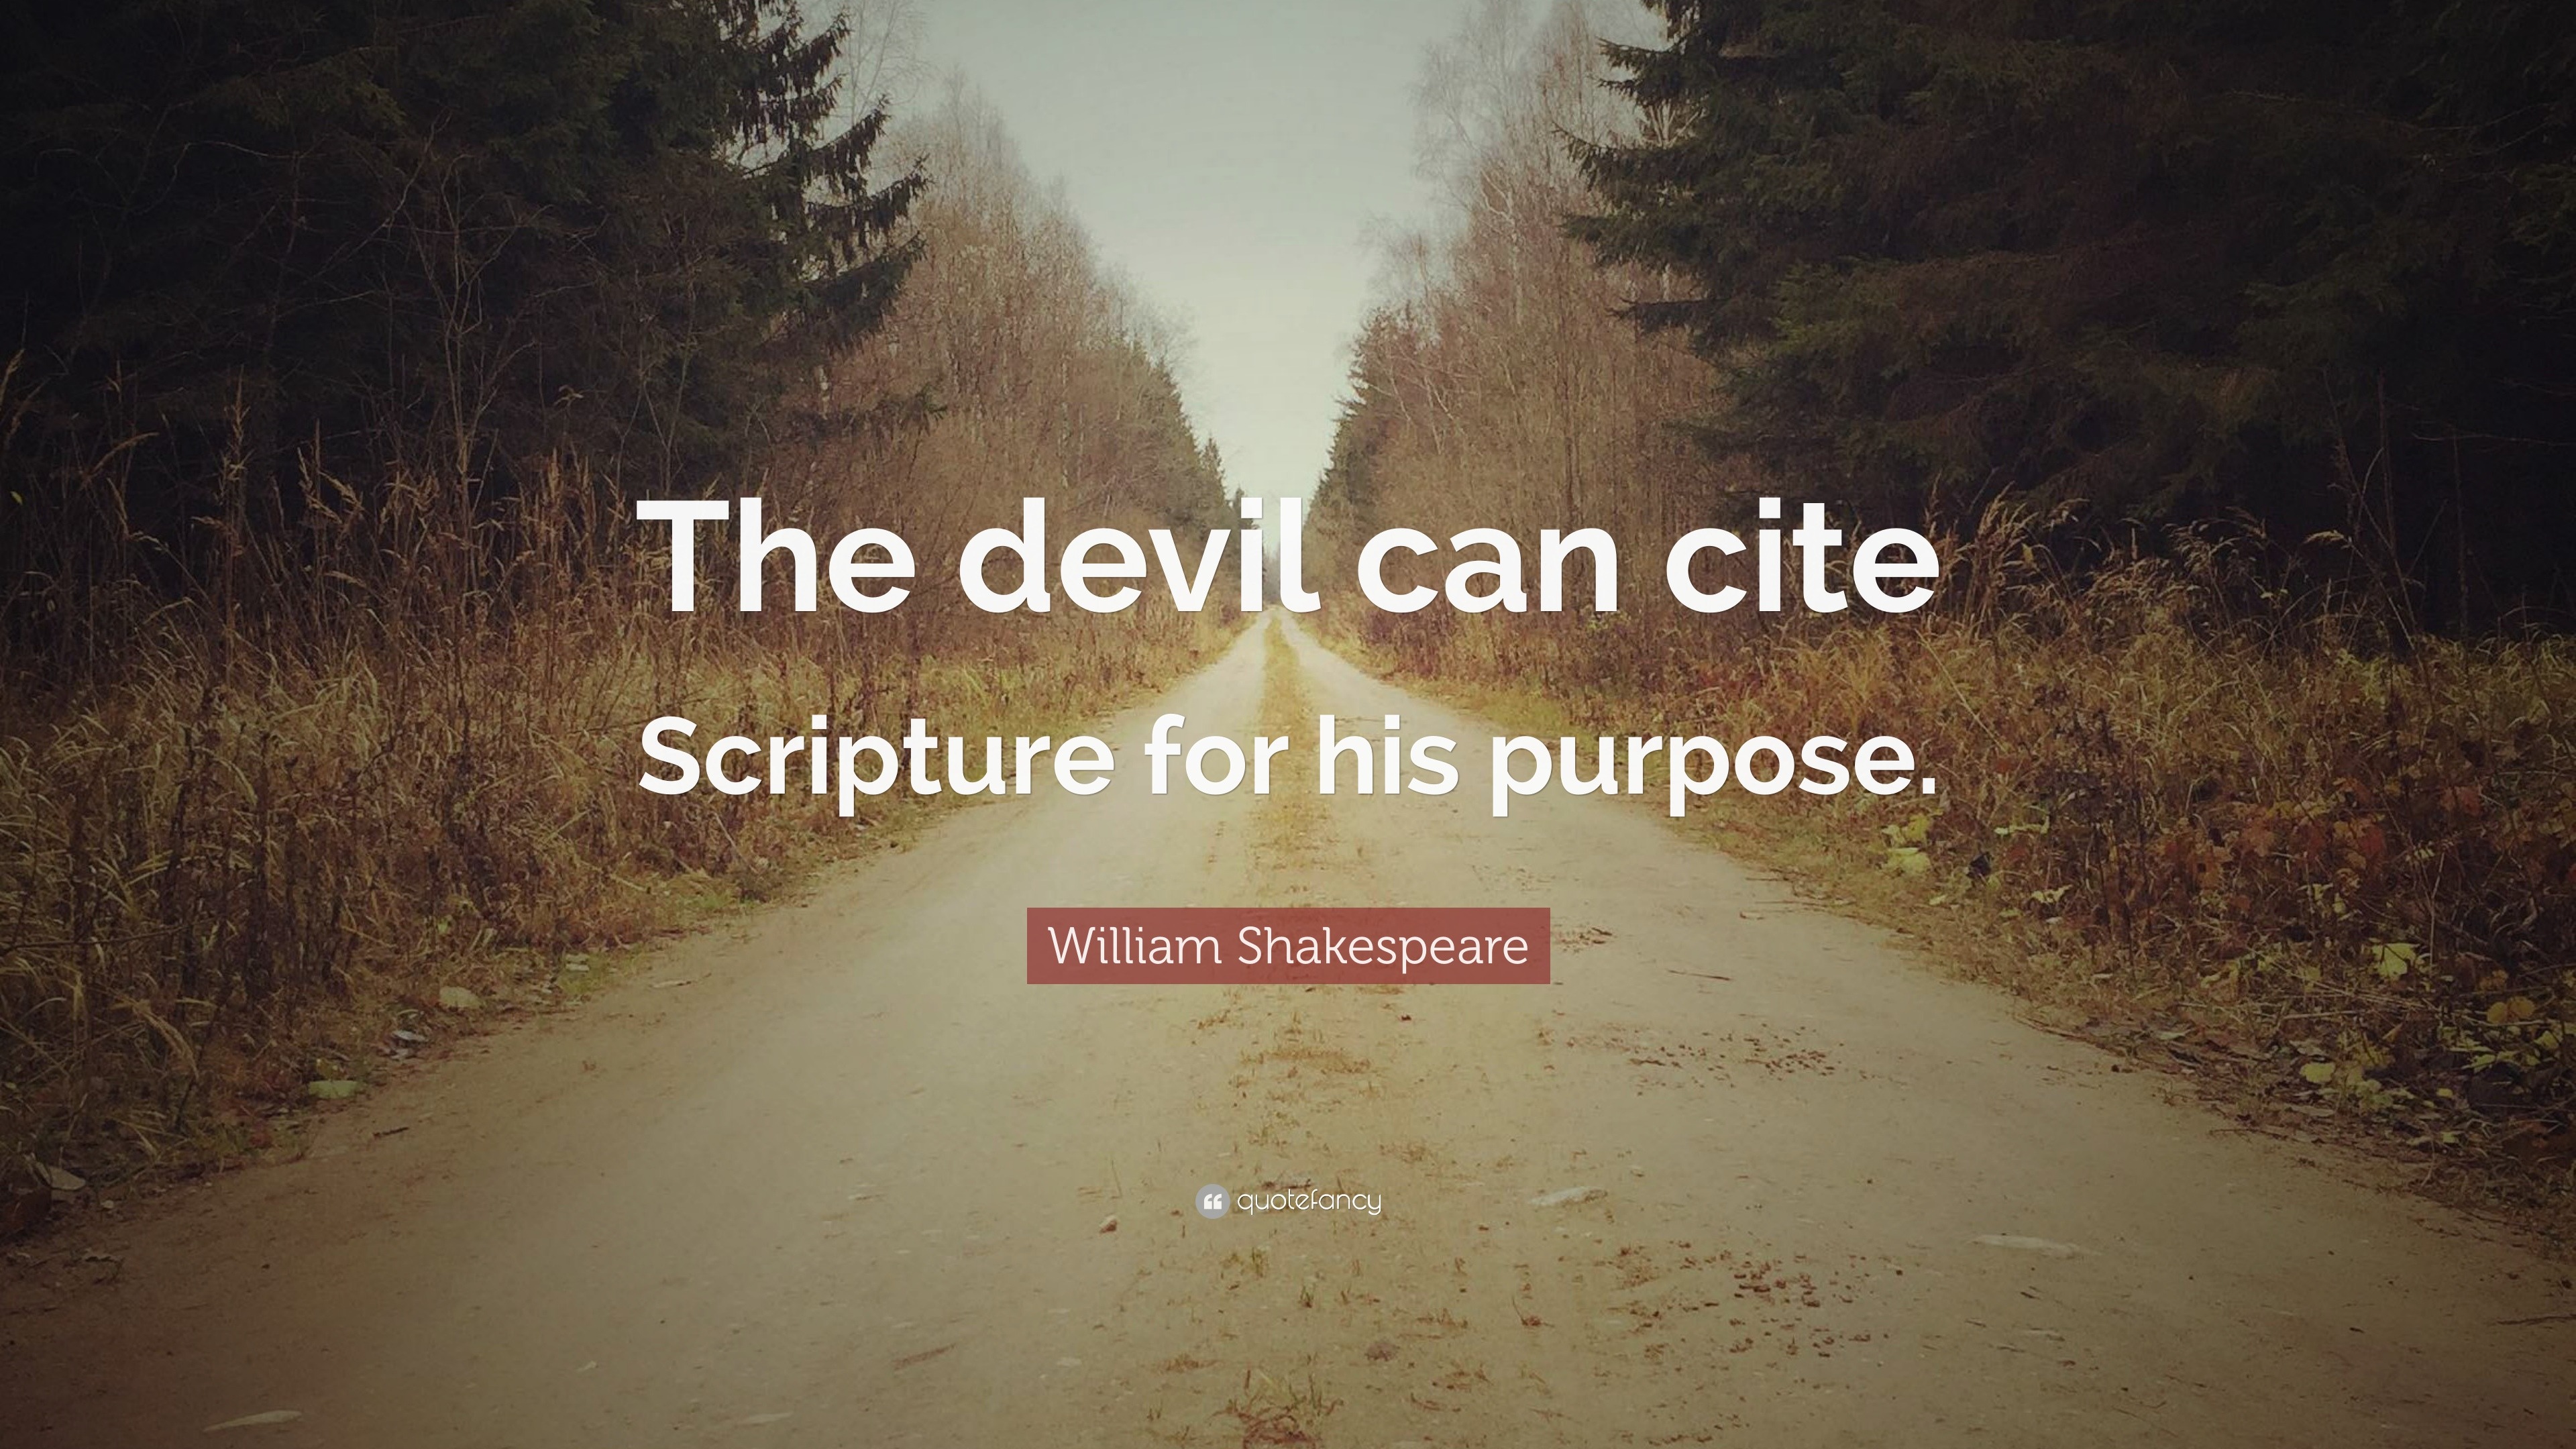 William Shakespeare Quote: "The devil can cite Scripture for his purpose." (12 wallpapers ...